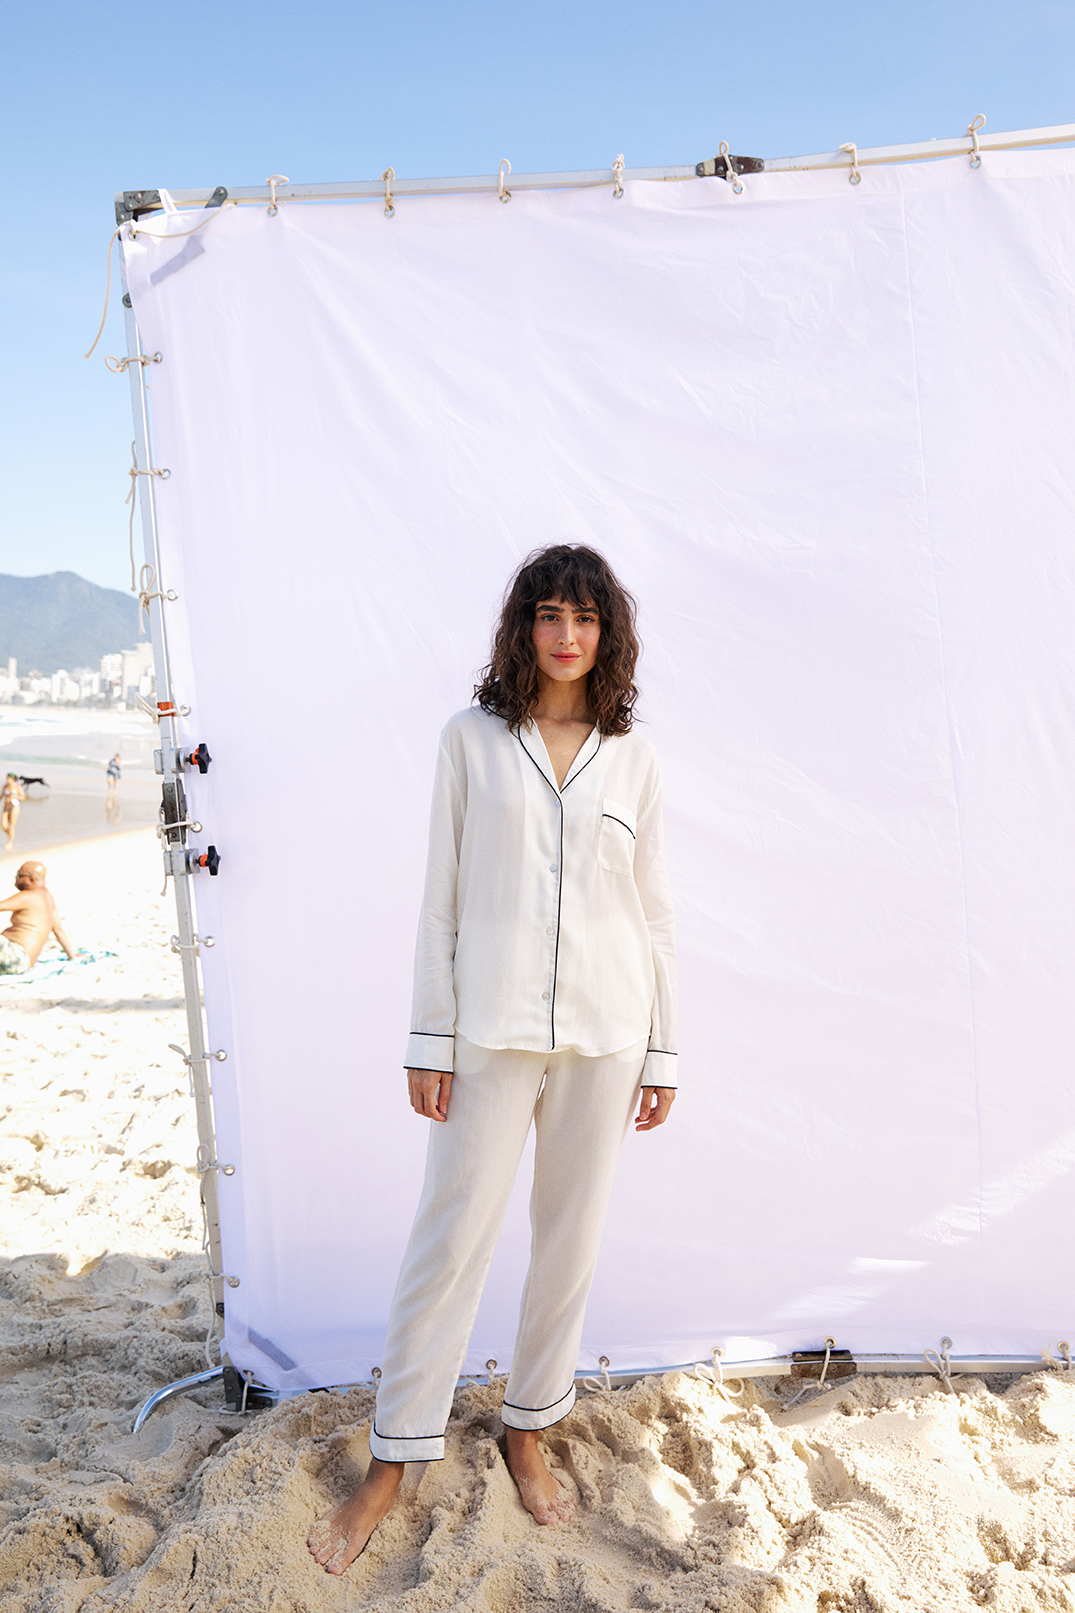 A model in front of a white photo backdrop on a beach wears  white silk pajamas with black piping